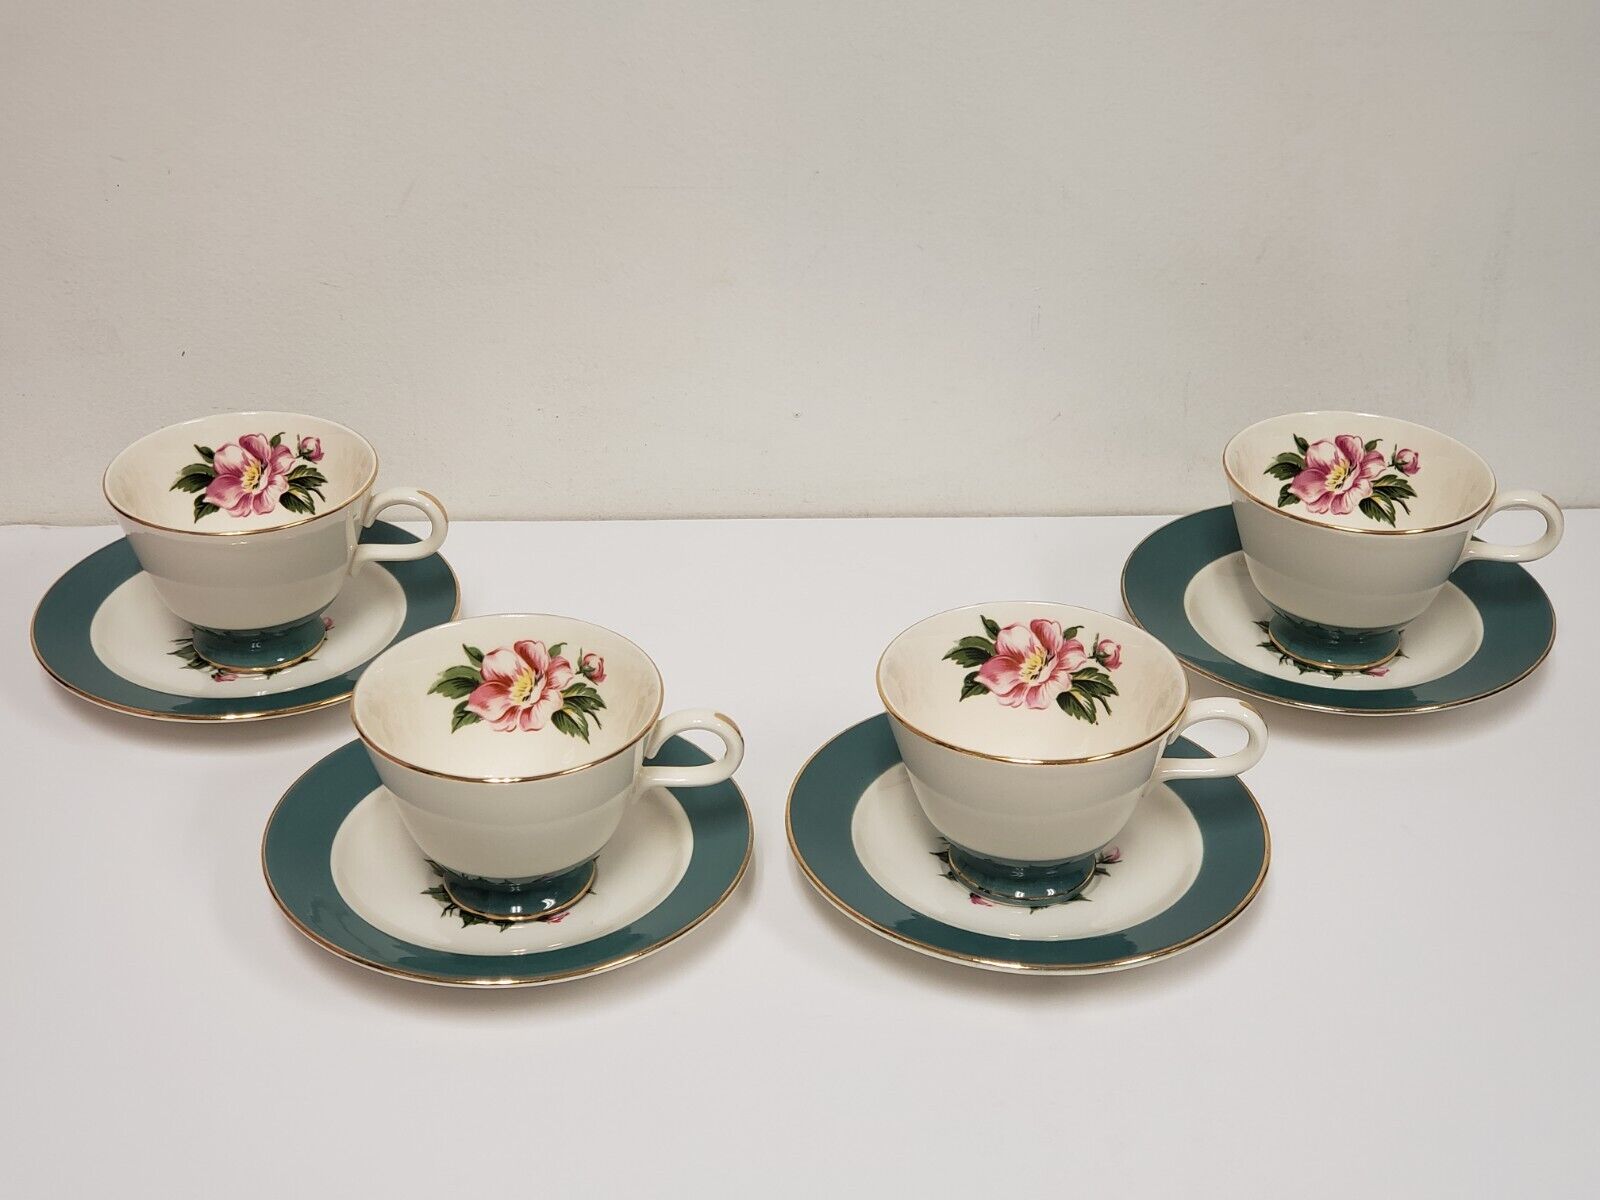 Vintage Homer Laughlin Empire Green 4 Footed Teacups & 4 Saucers Gently Used